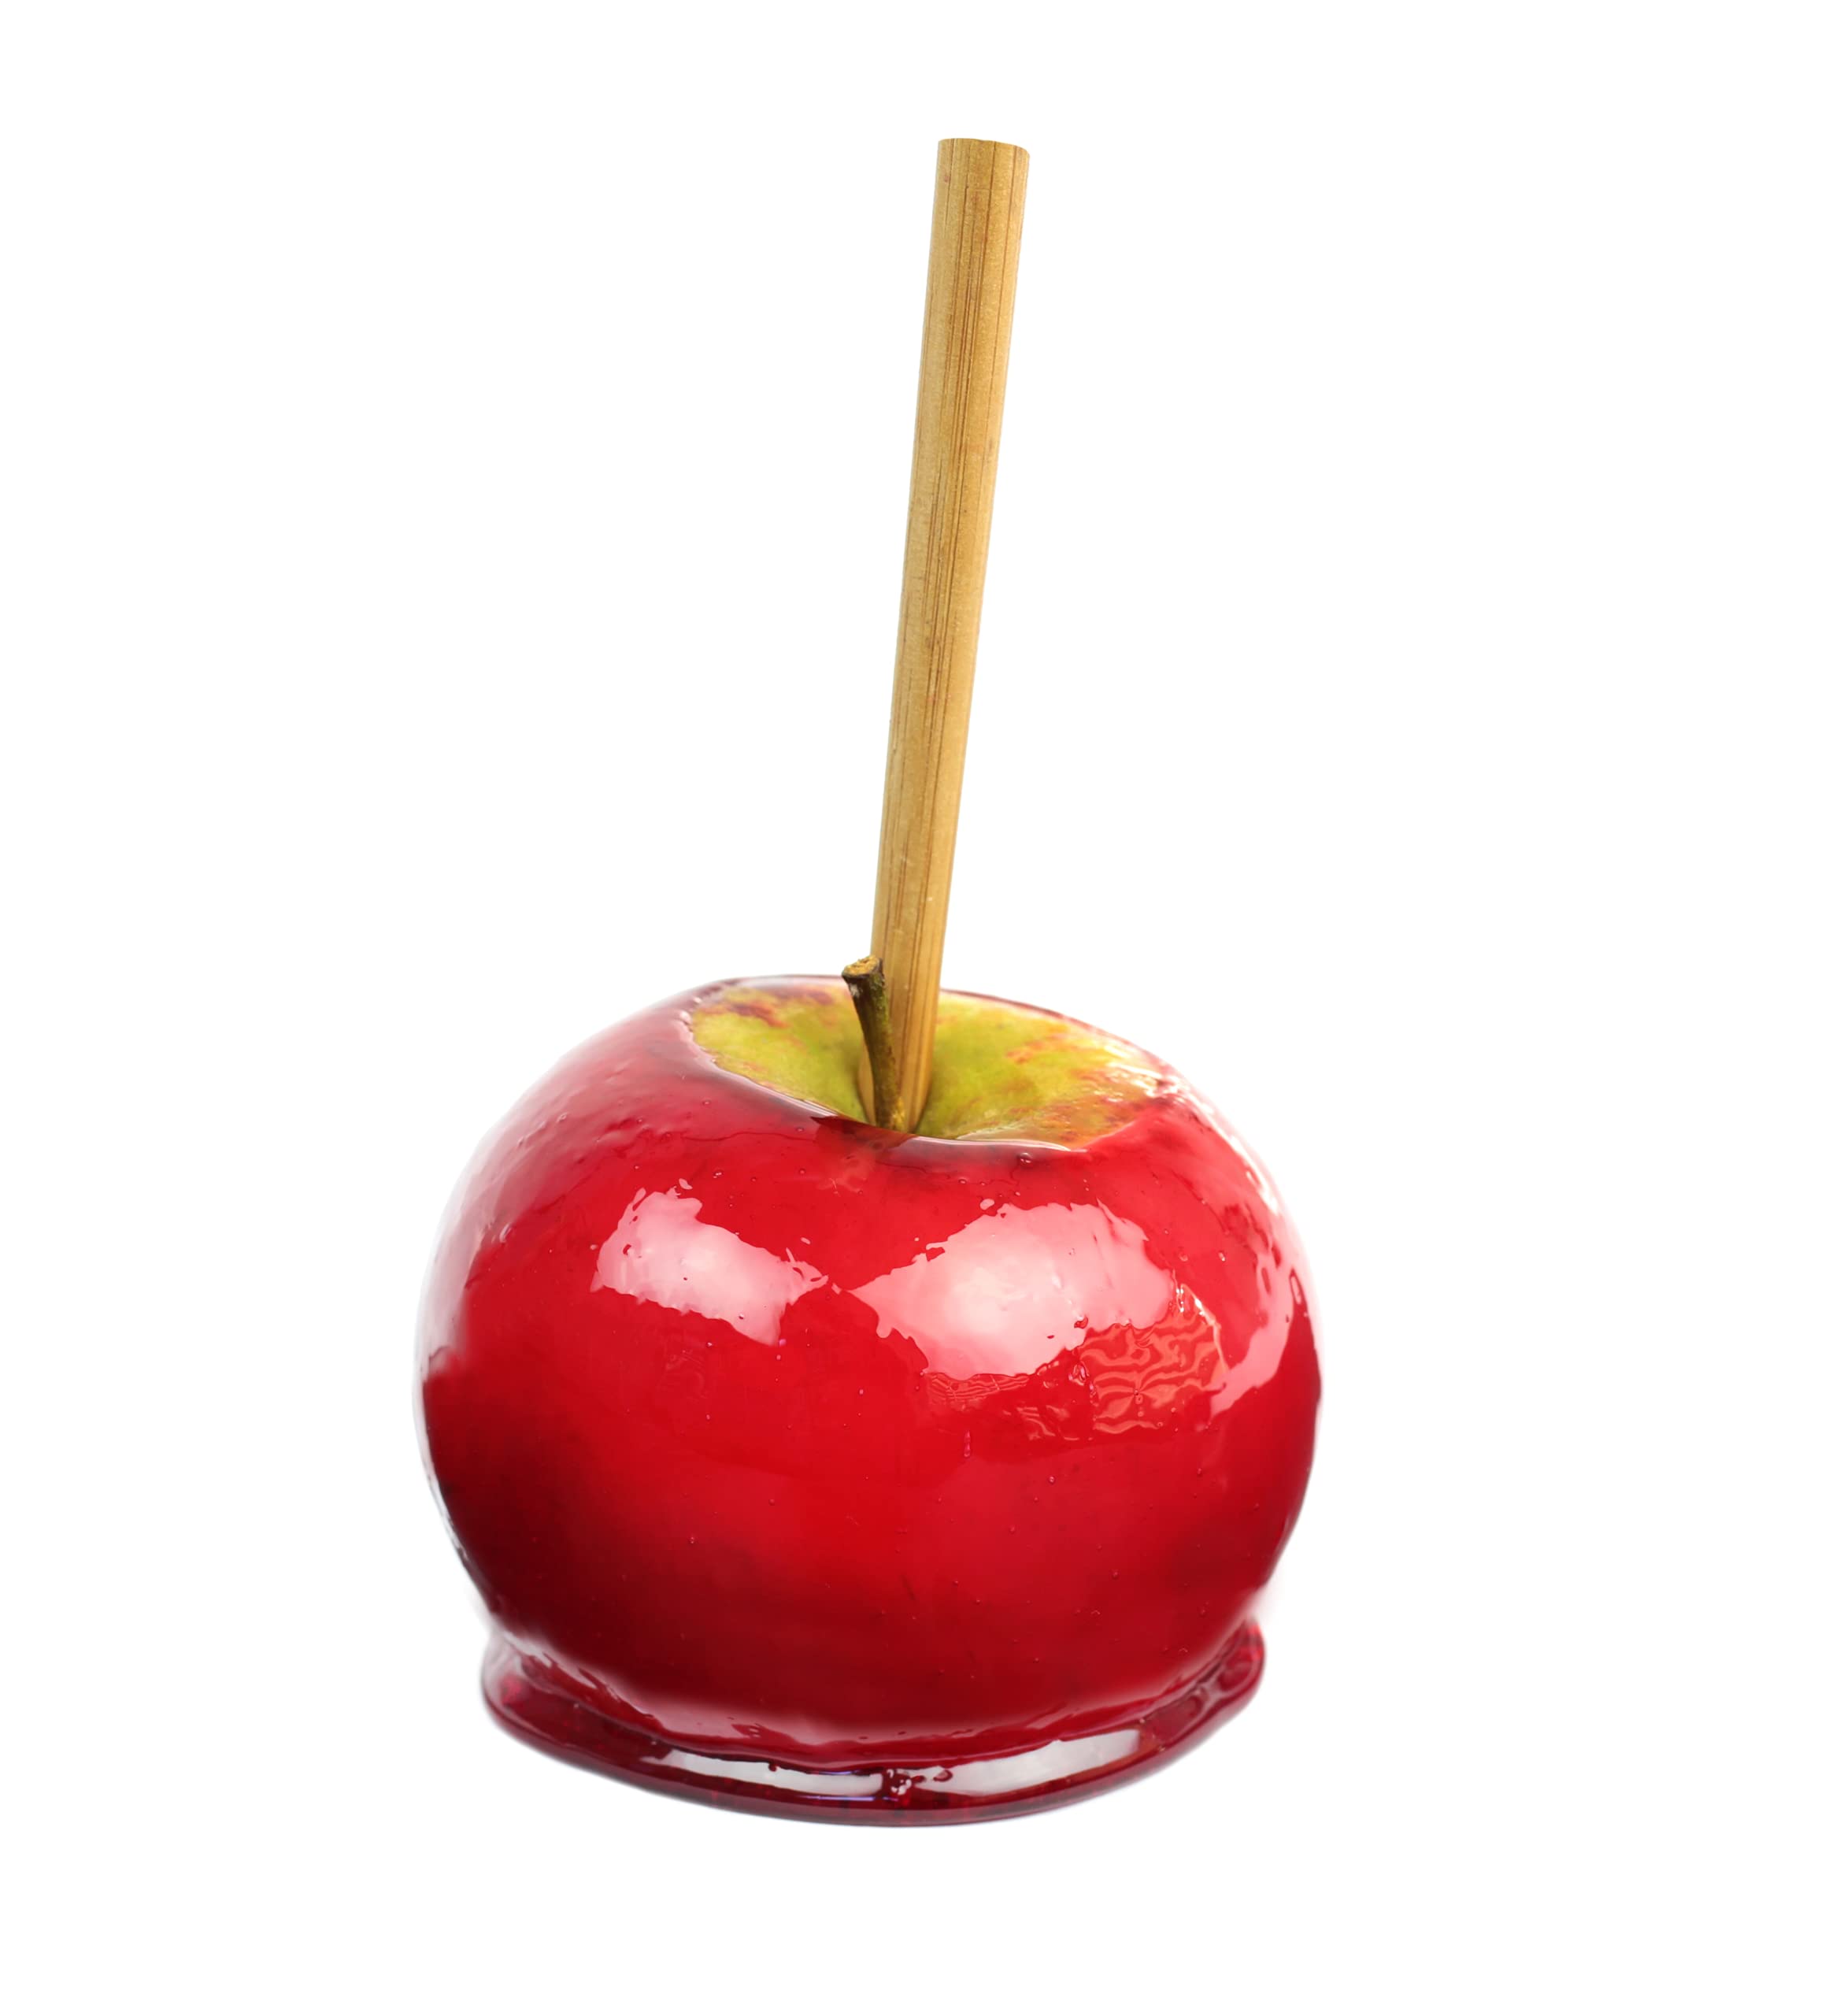 Perfect Stix 5.5 Inch Sturdy Candy Apple Bamboo Skewers - 6mm Thick. Tip is Semi-Pointed. Natural Bamboo Sticks Caramel Candy Apple Sticks for Corn Dog,Pack of 125CT